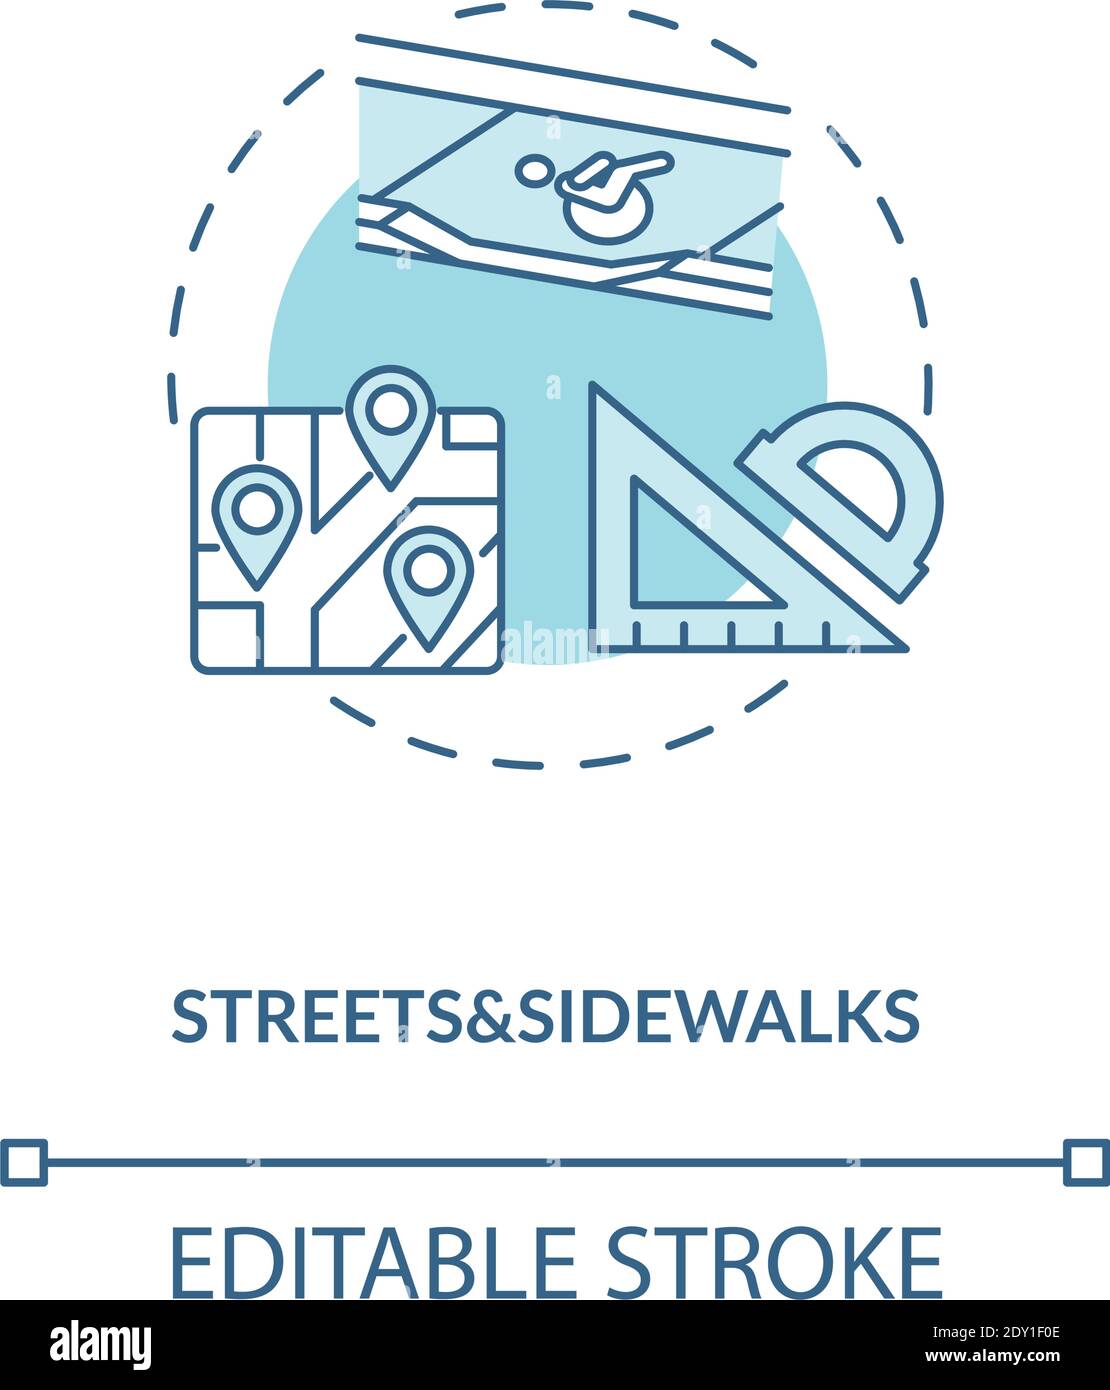 Streets and sidewalks turquoise concept icon Stock Vector